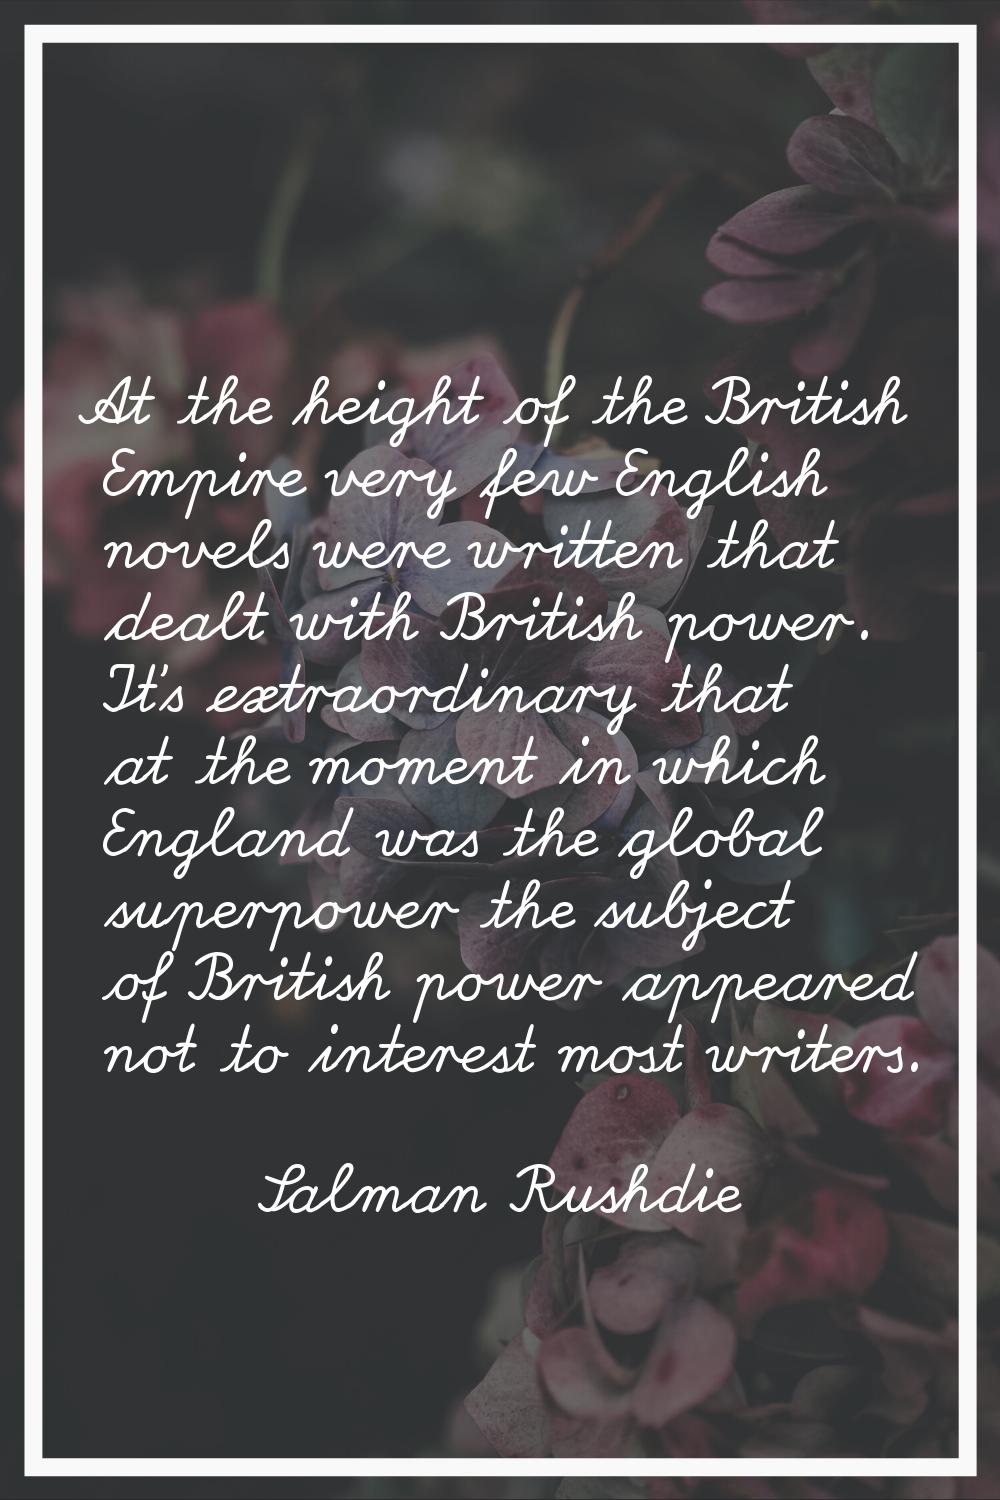 At the height of the British Empire very few English novels were written that dealt with British po